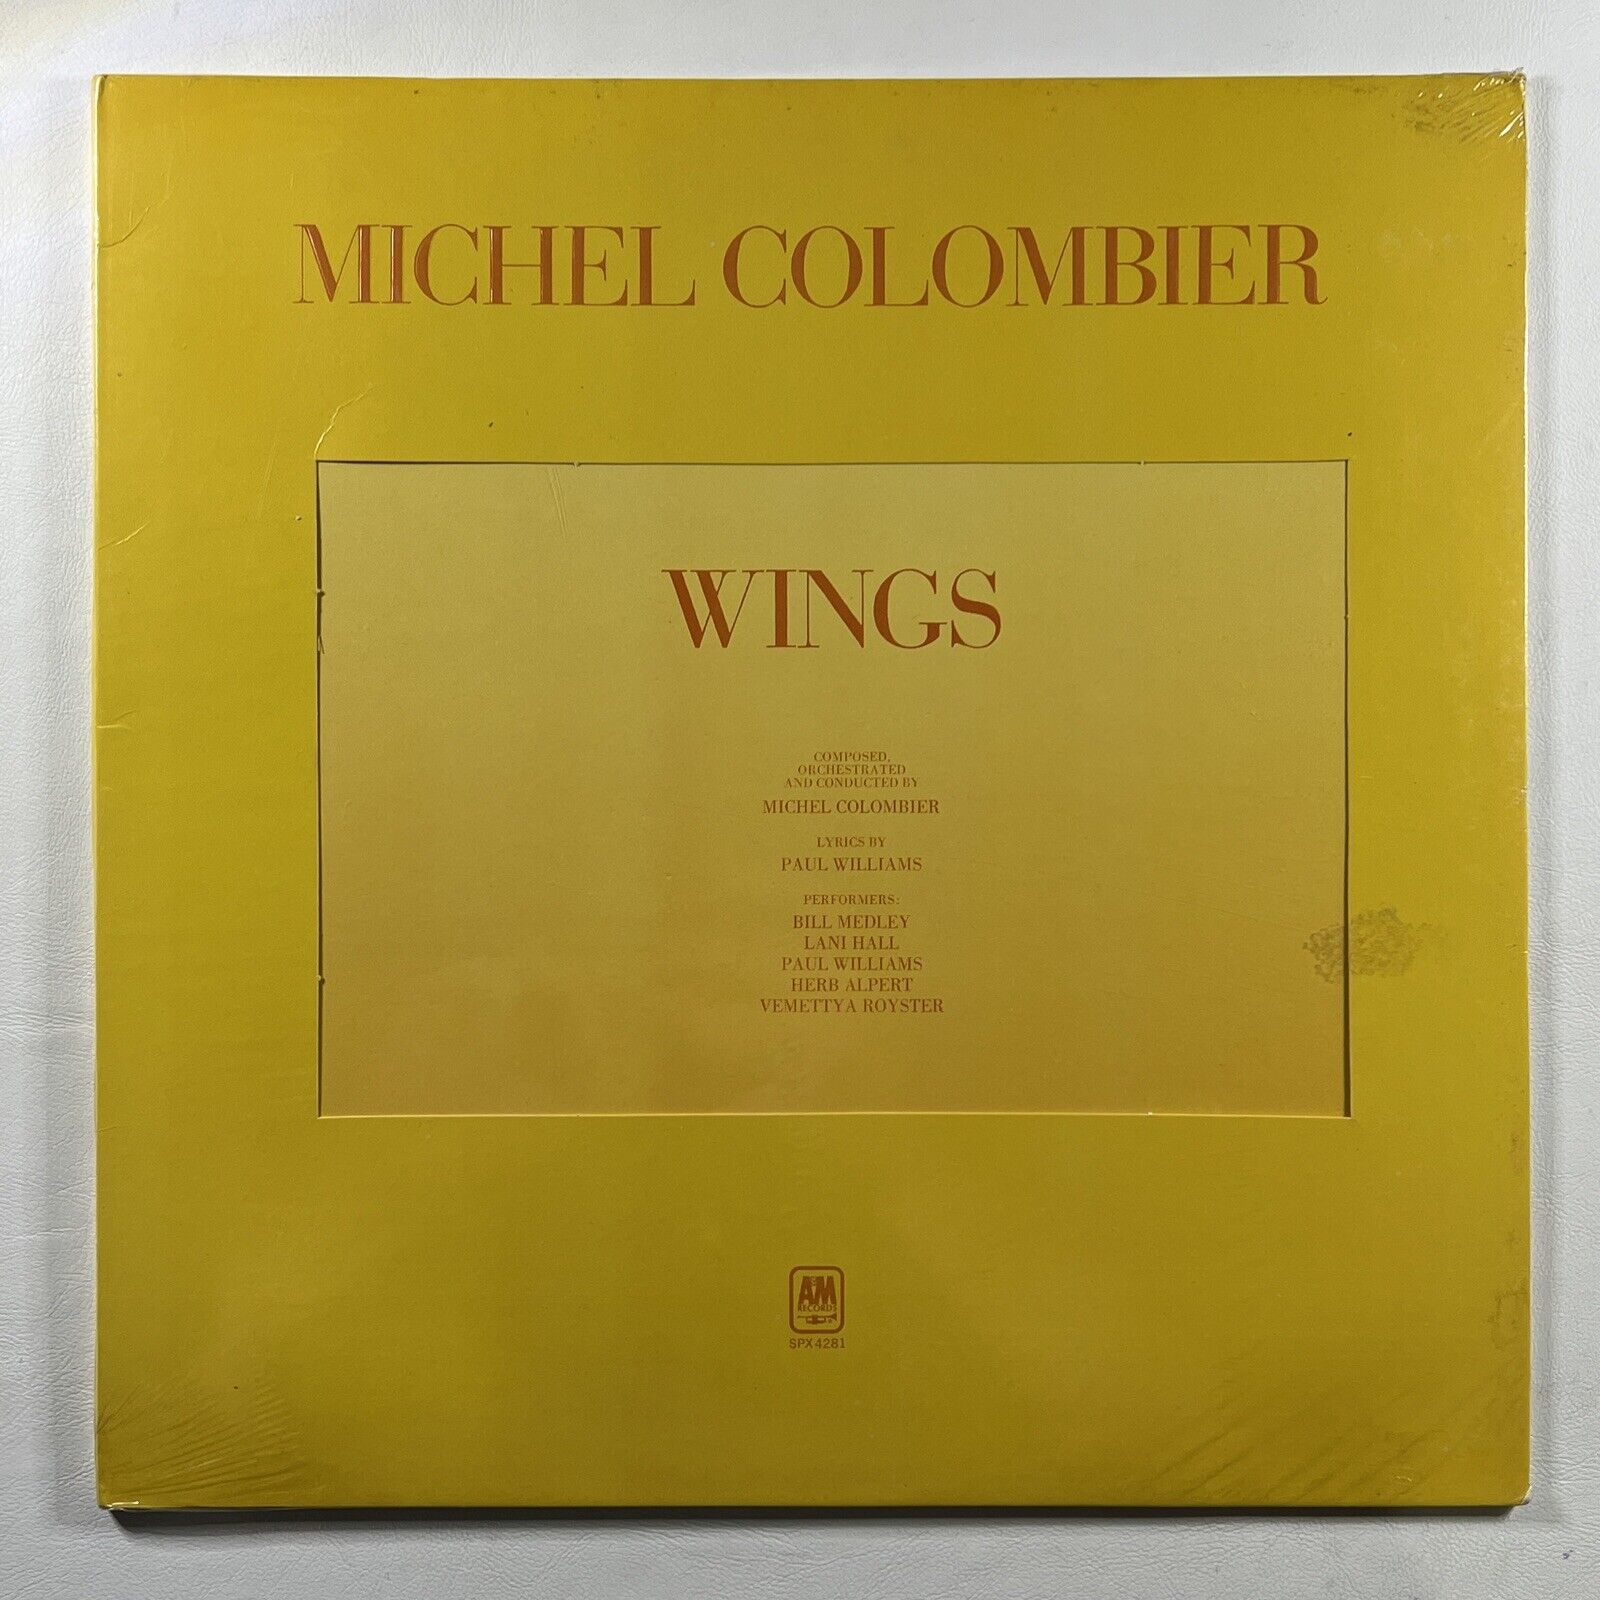 MICHEL COLOMBIER “Wings” Rare Sealed LP/A&M Records (SEALED) 1971 Gatefold